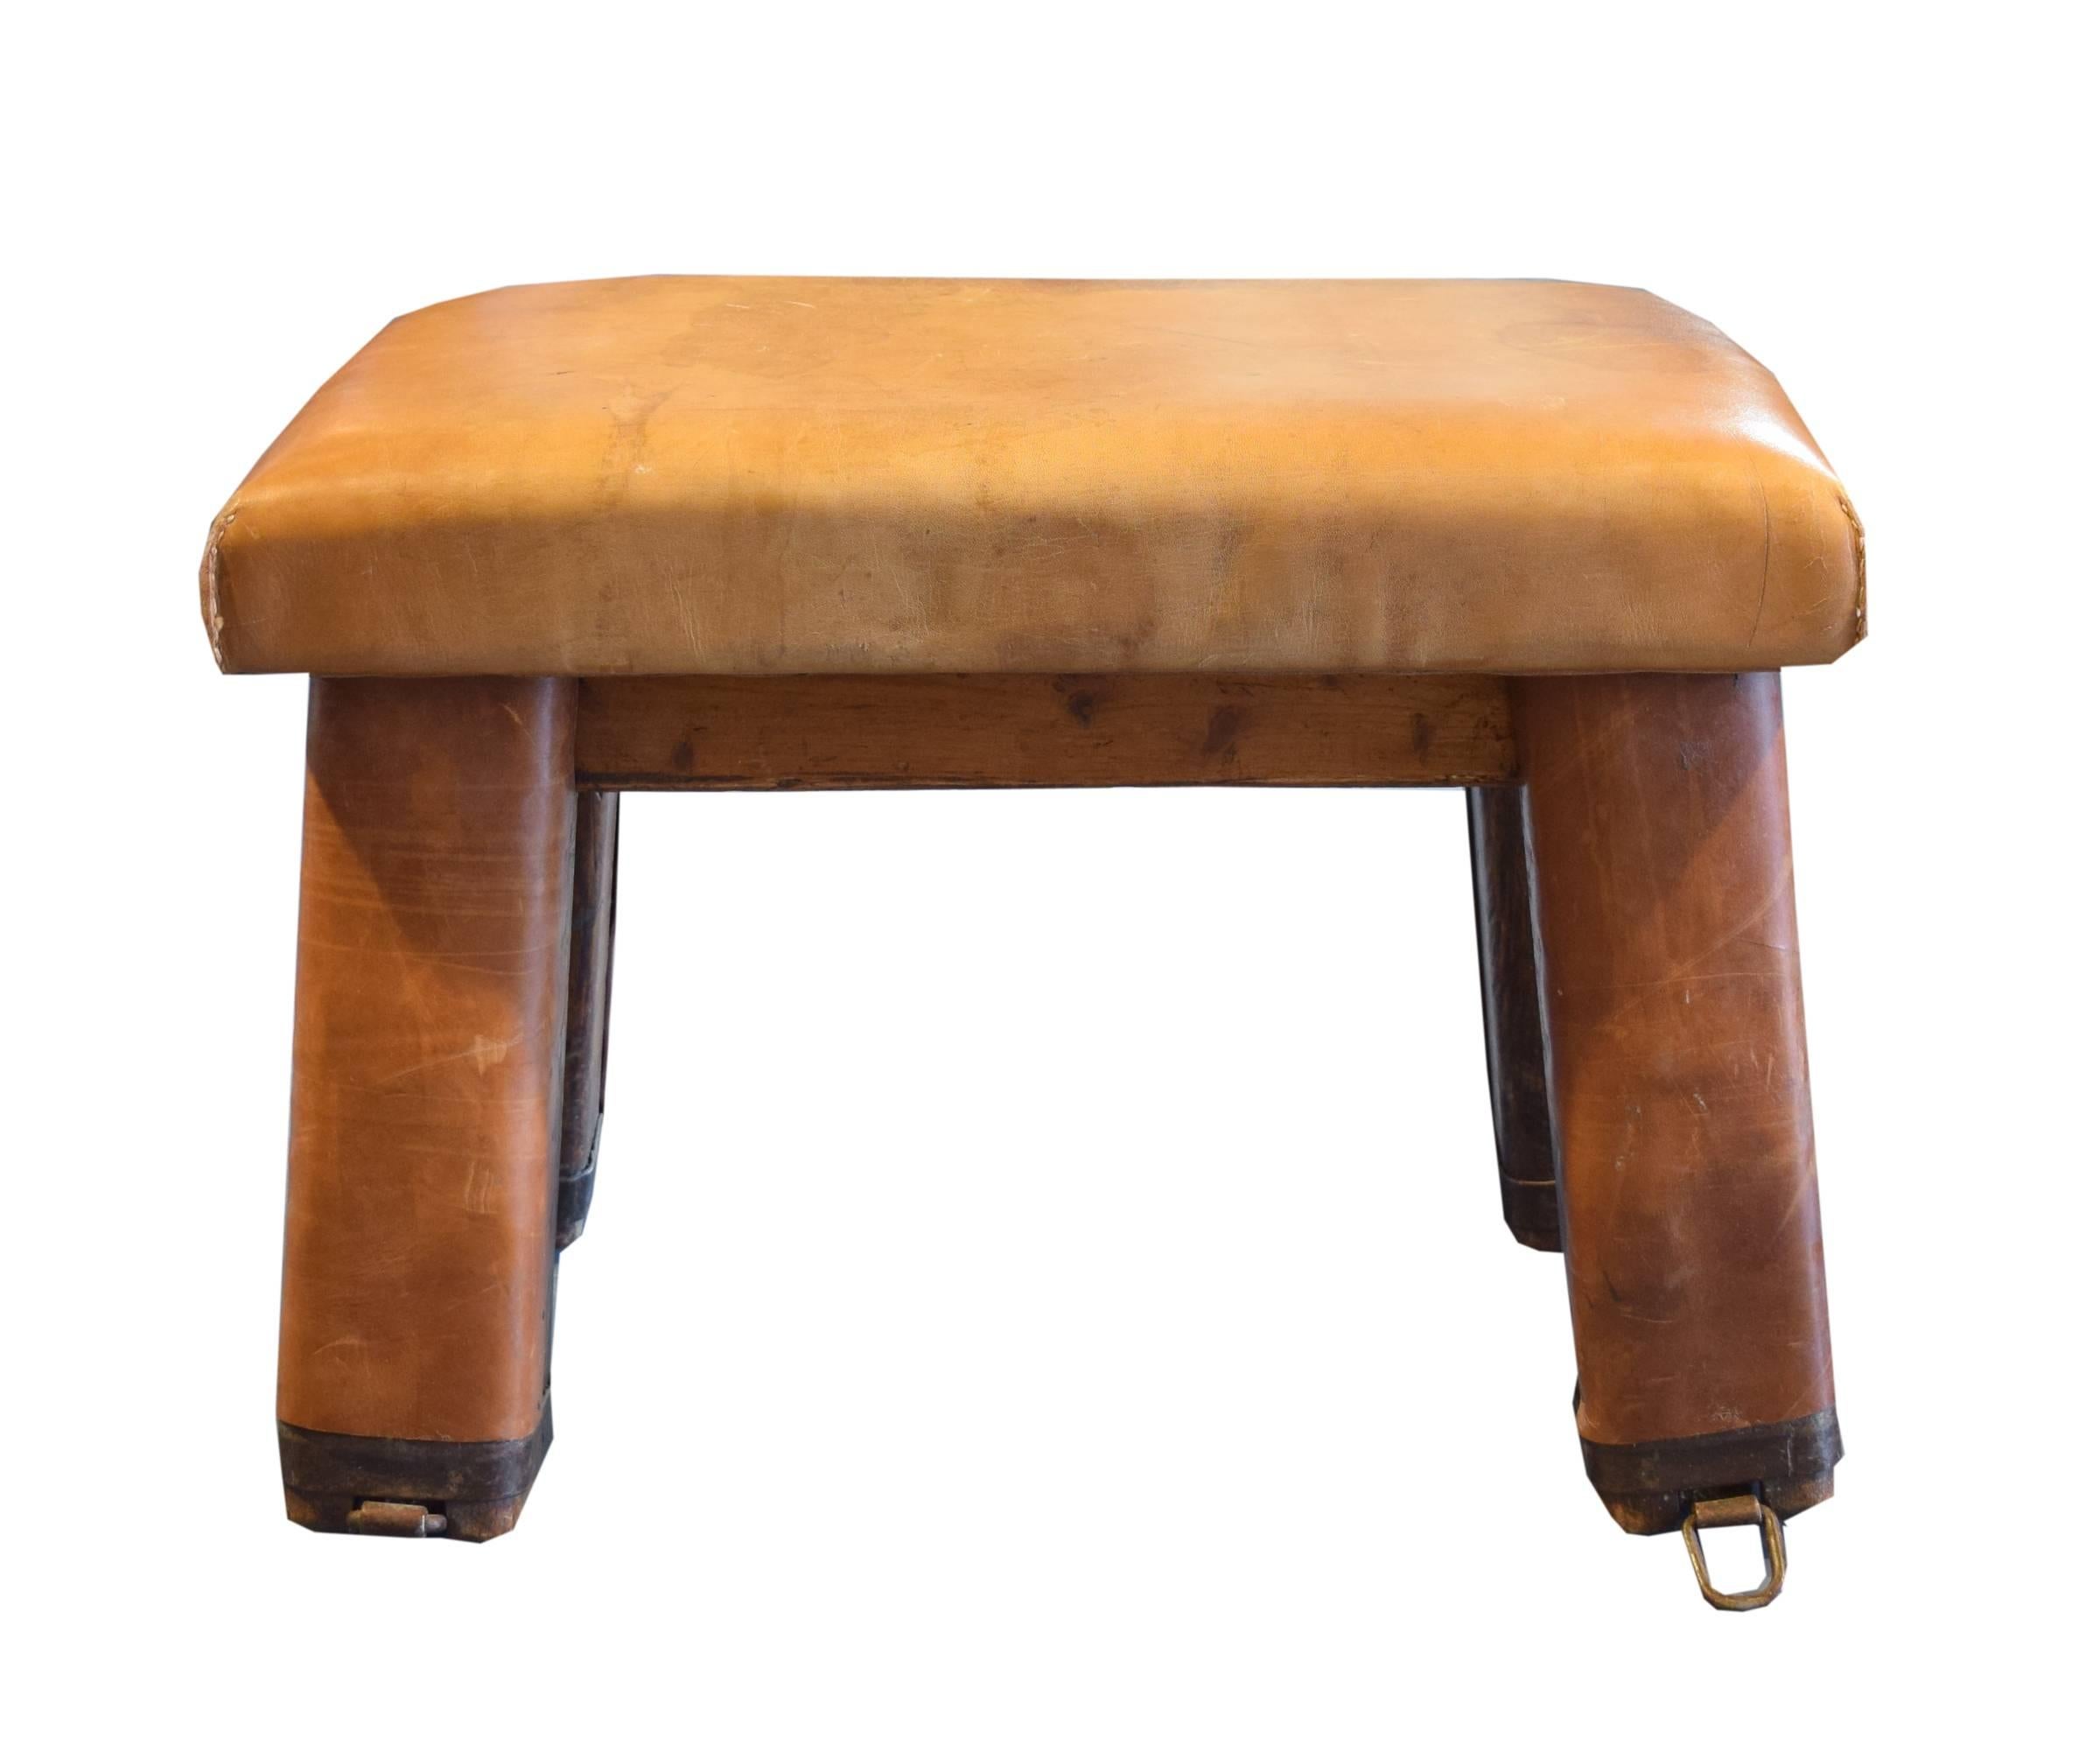 Wooden German vaulting bench with leather wrapped top and legs and wonderful patina, circa 1930.